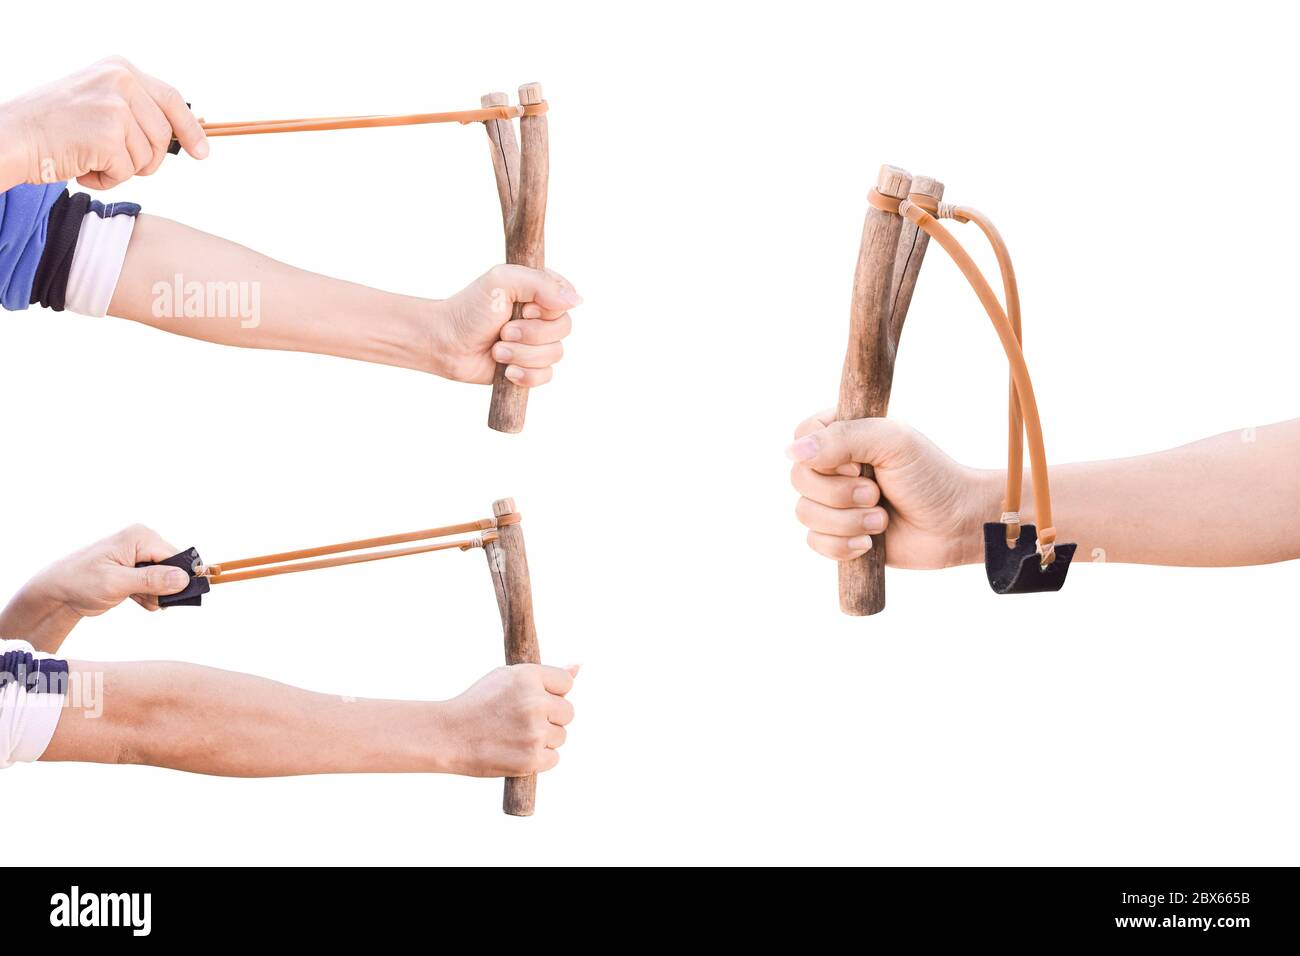 Set of hand holding aiming Slingshot, Isolated on white background with clipping path. Stock Photo